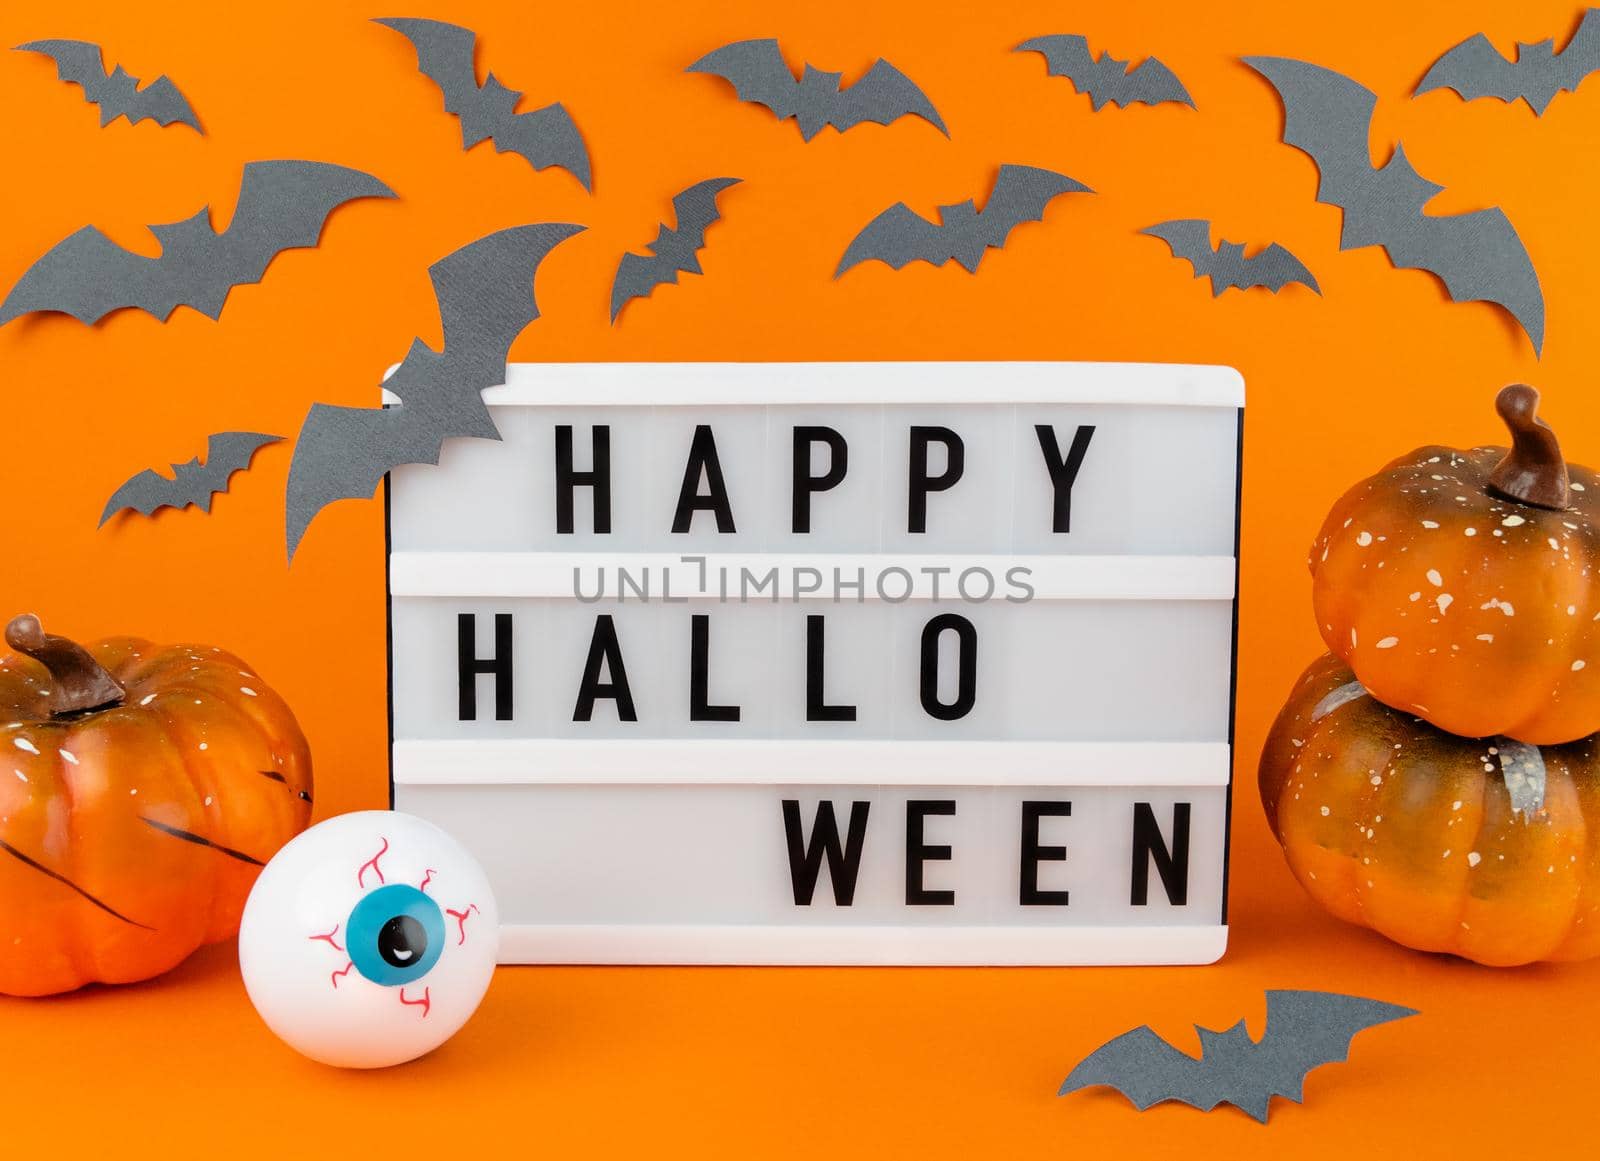 Light box with Happy Halloween phrase with pumpkins, bats and eyeball decoration on an orange background. by anna_artist